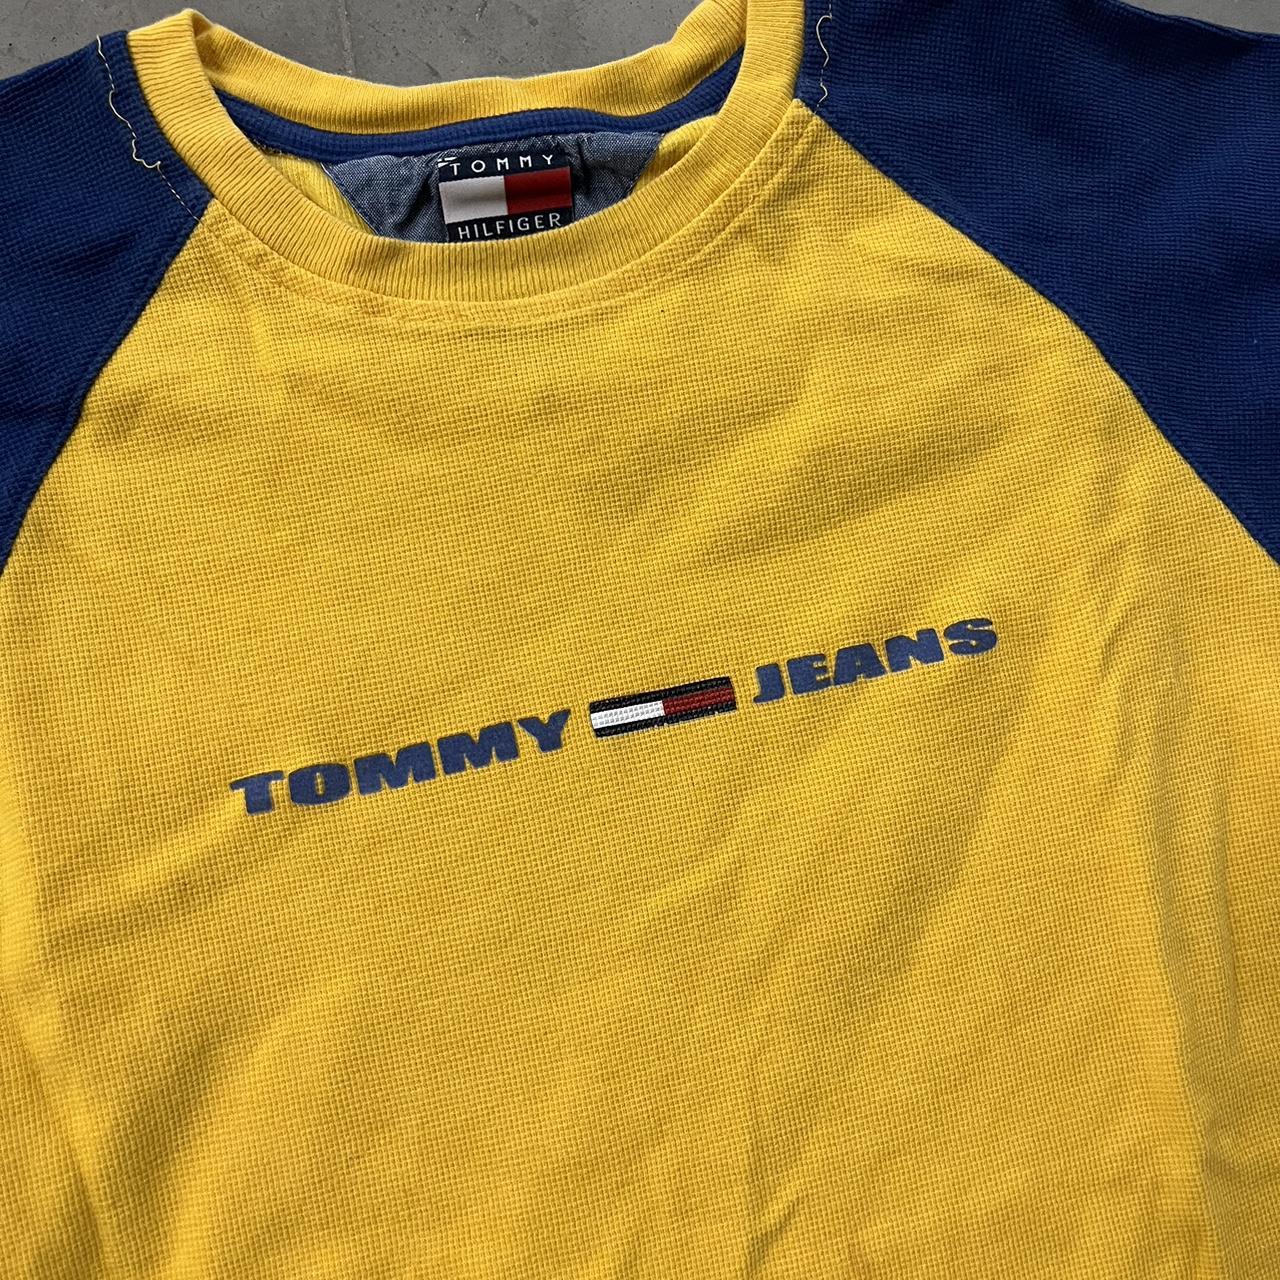 Tommy Hilfiger Men's Yellow and Navy T-shirt (2)